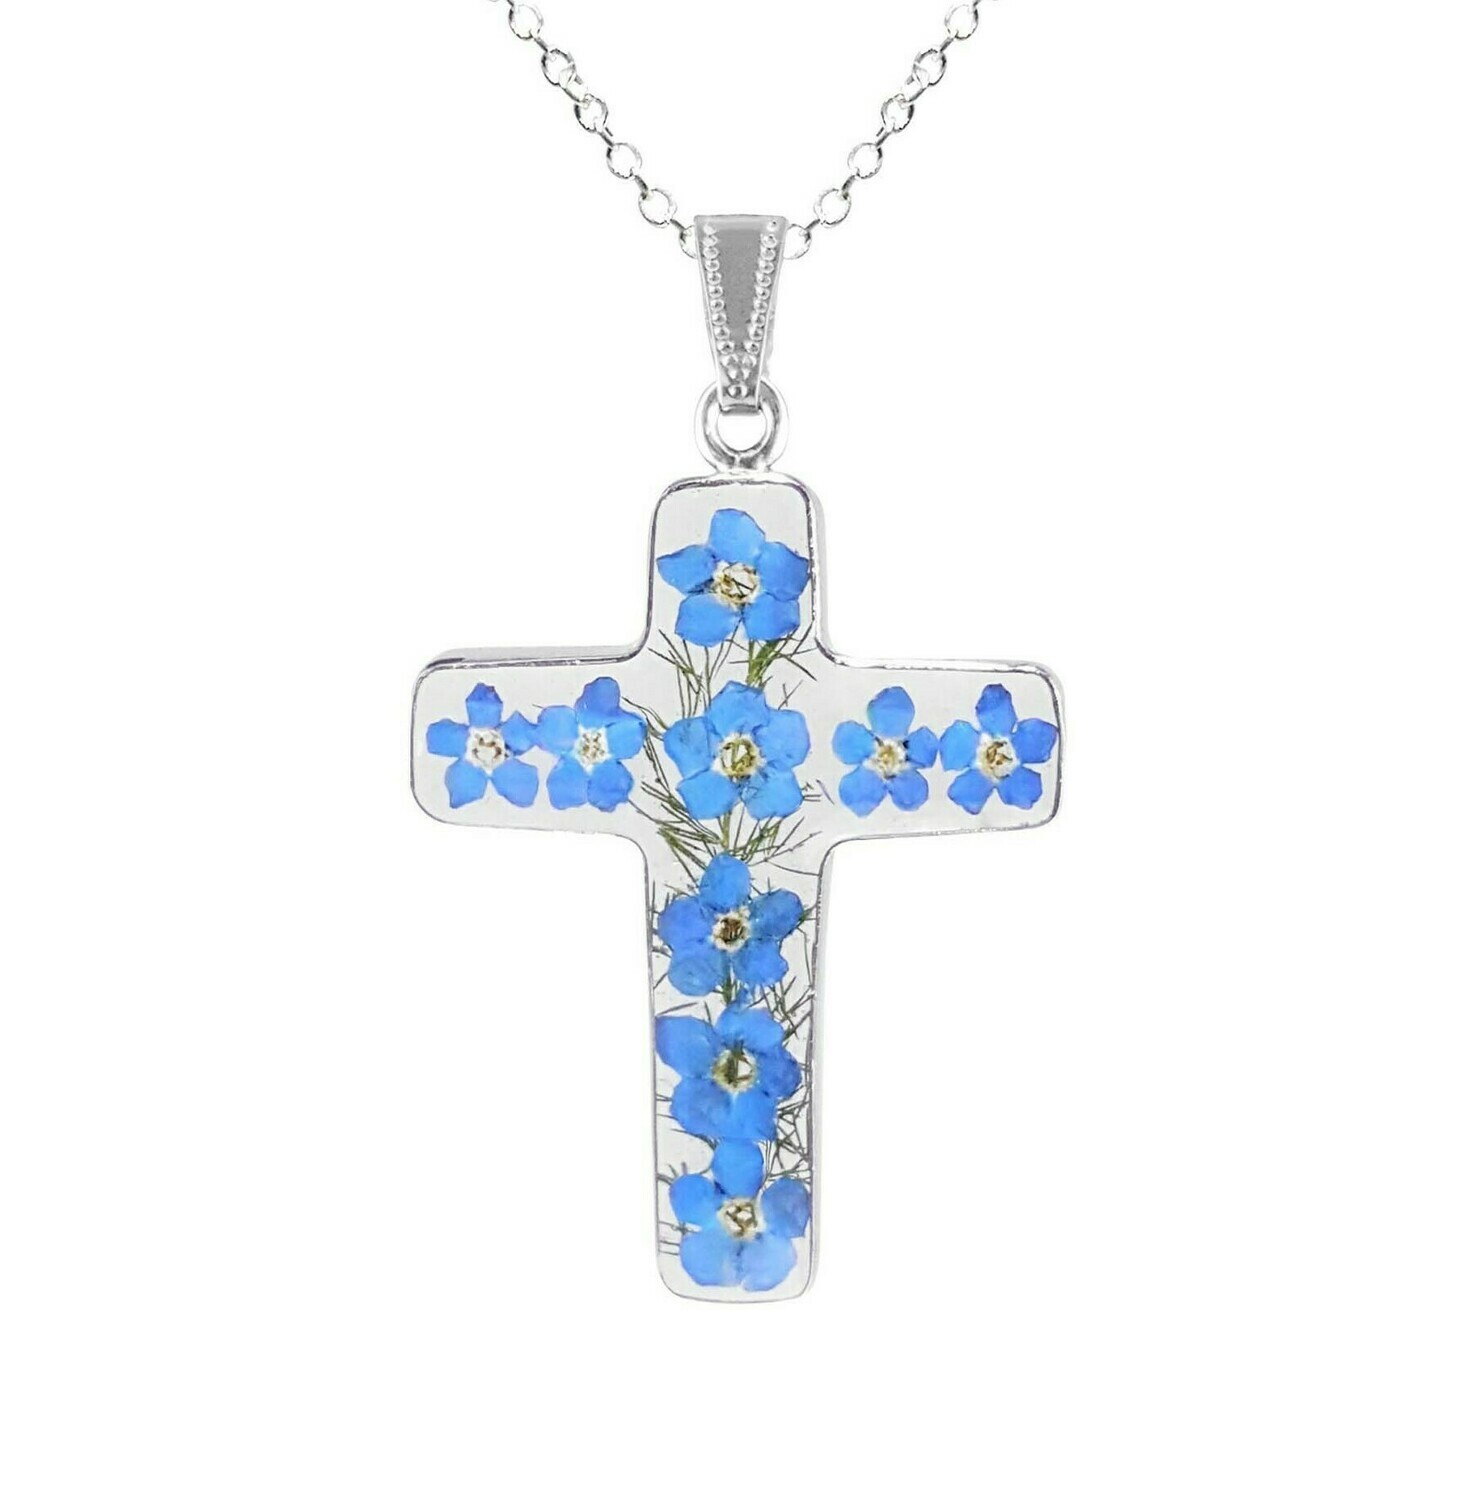 Forget-Me-Not Necklace, Large Cross, Transparent